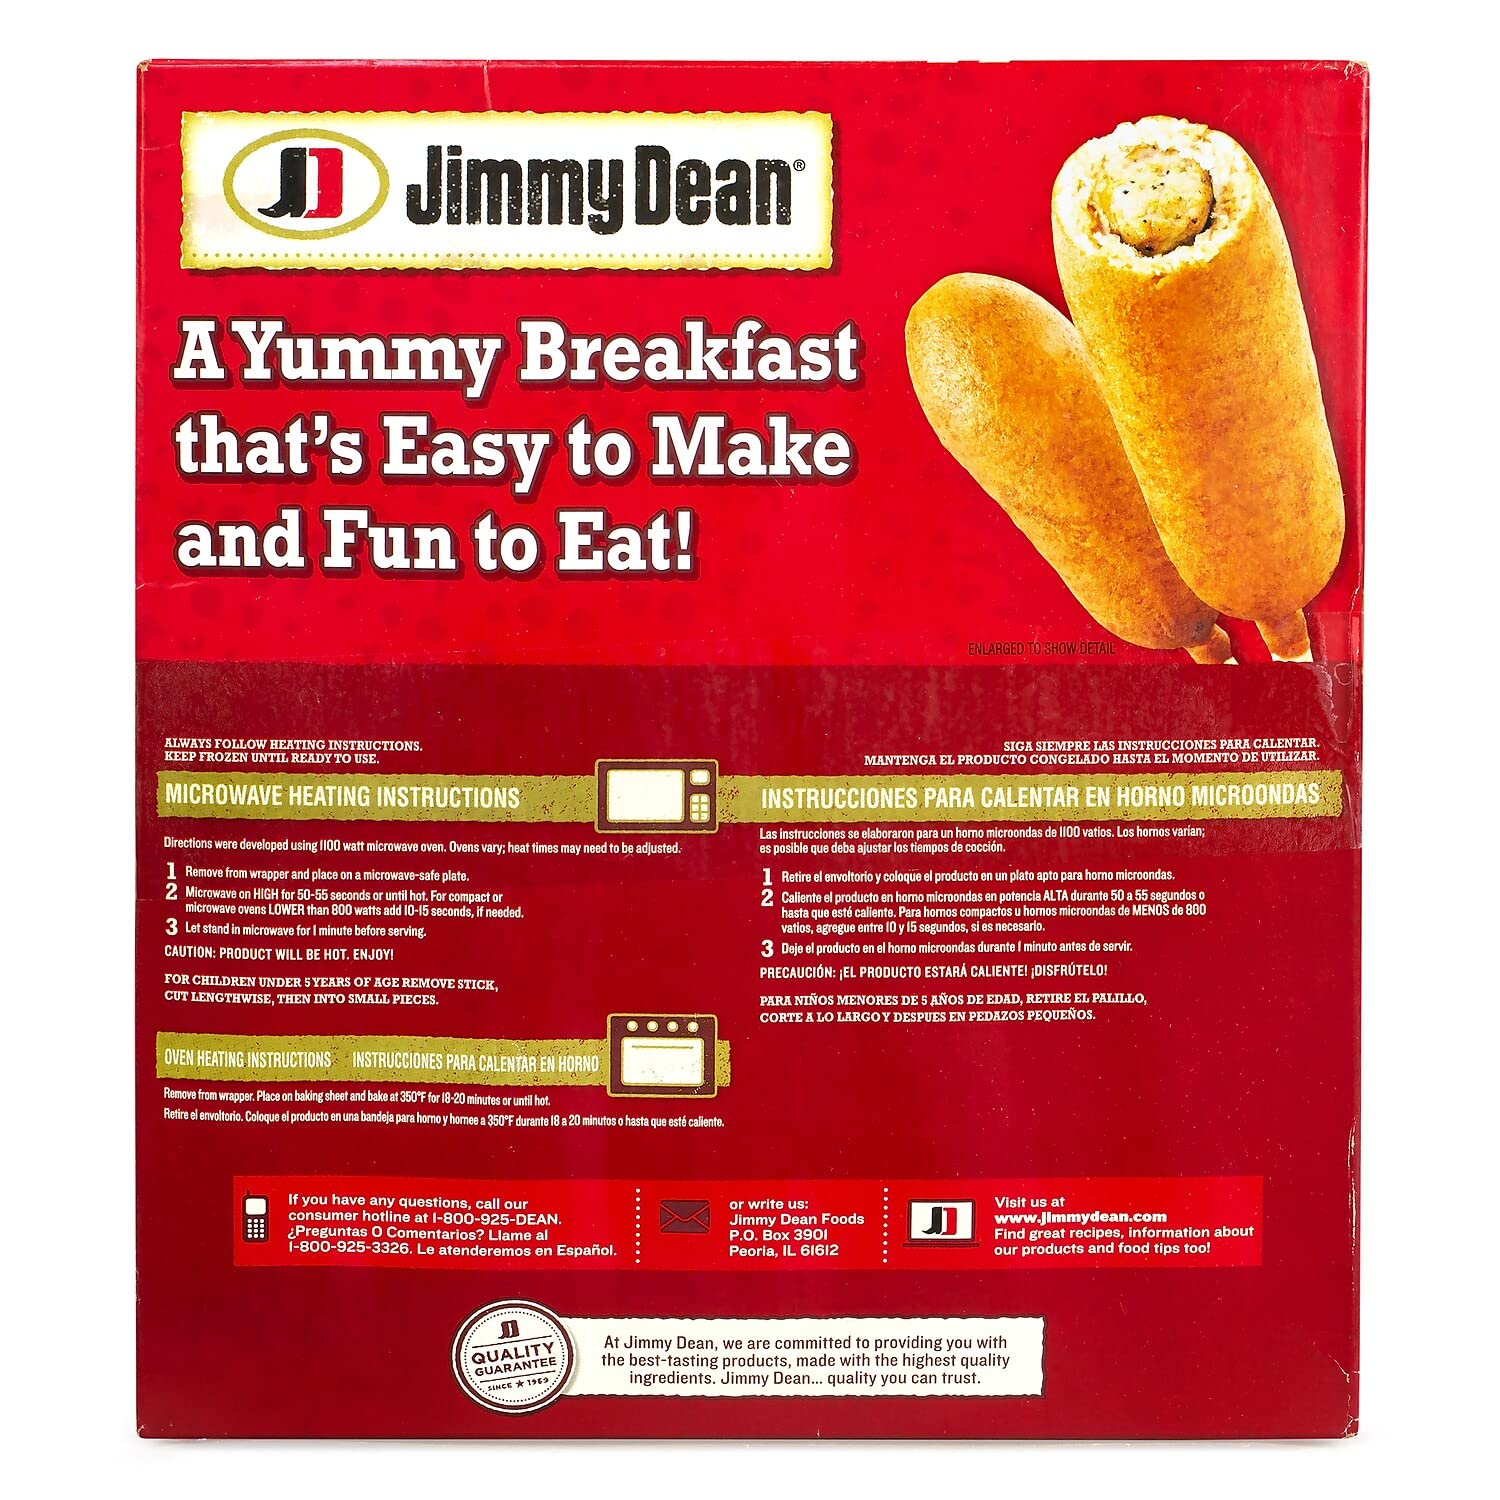 Jimmy Dean Pancake and Sausage on a Stick -- 20 ct.